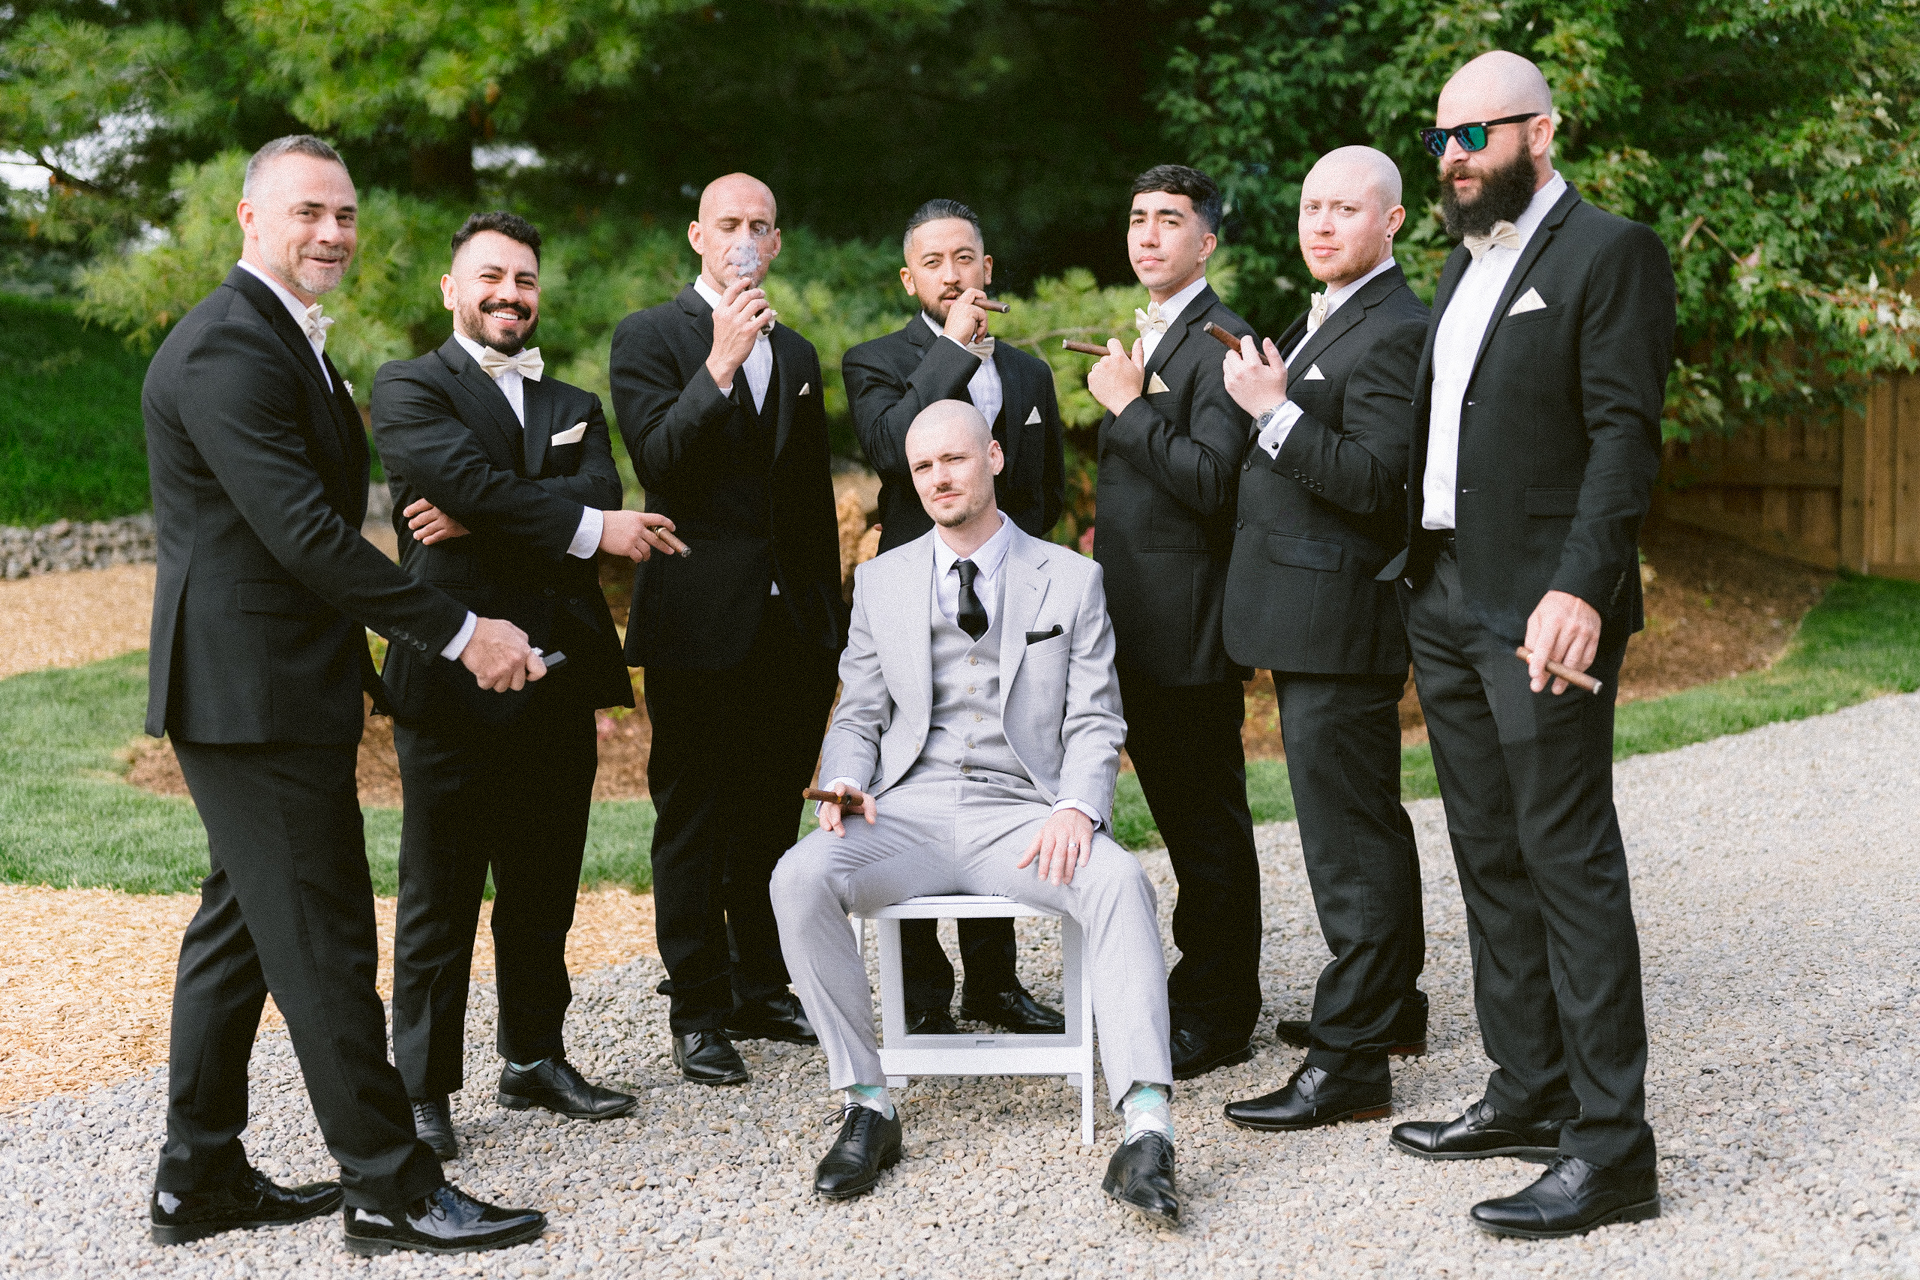 Group of men in suits posing with a seated groom in the center, making playful gestures